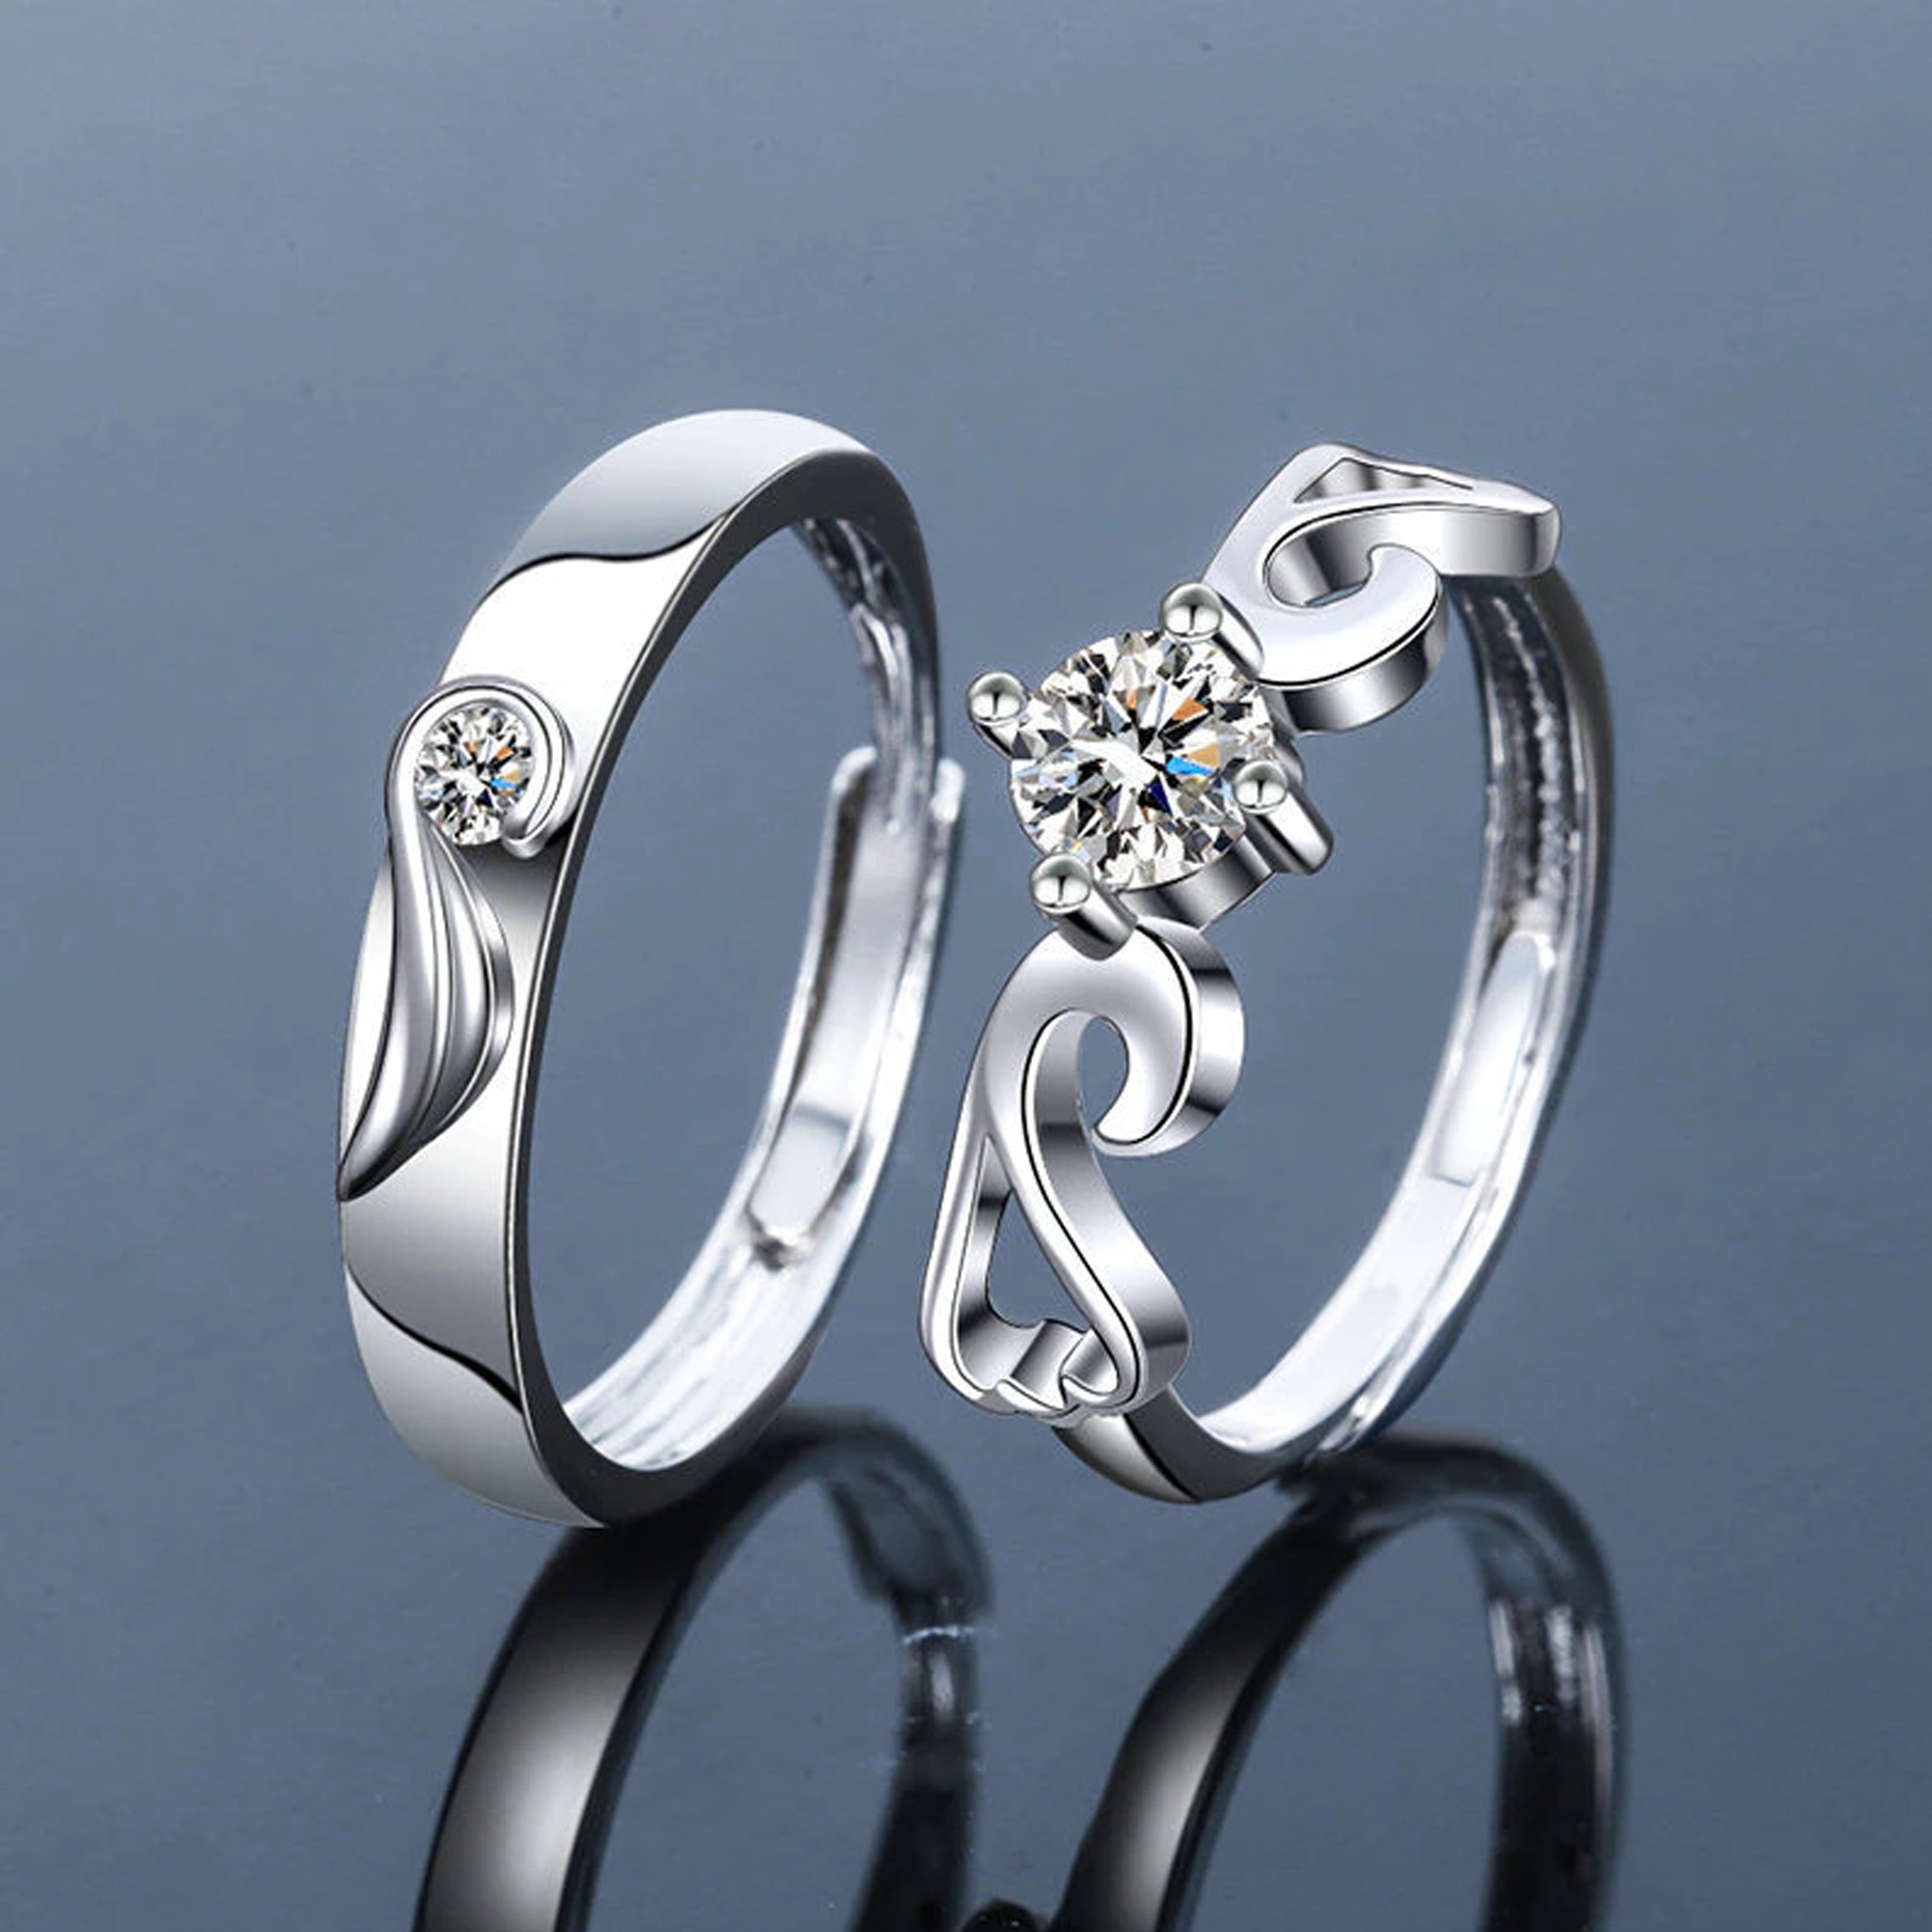 New Crafted Silver Ring Set